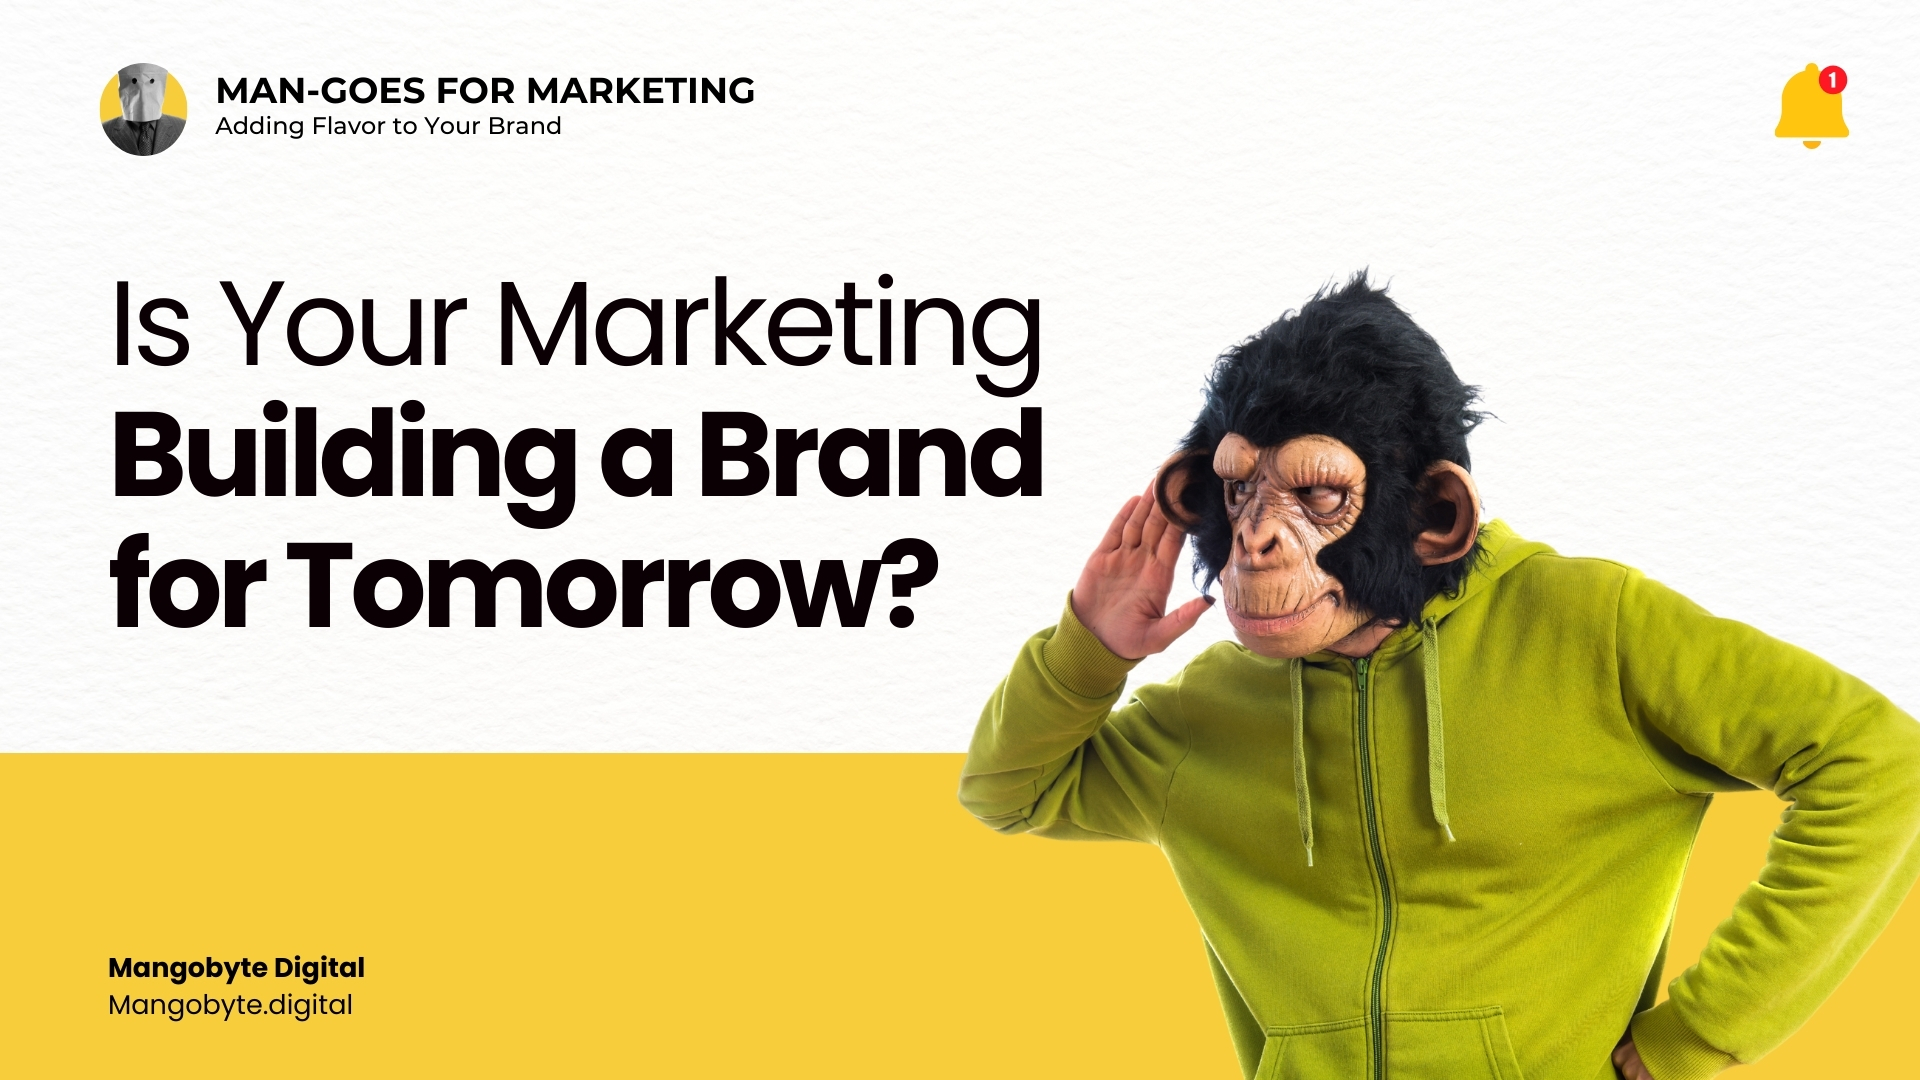 How Can You Tell if Your Marketing Builds a Brand for Tomorrow?